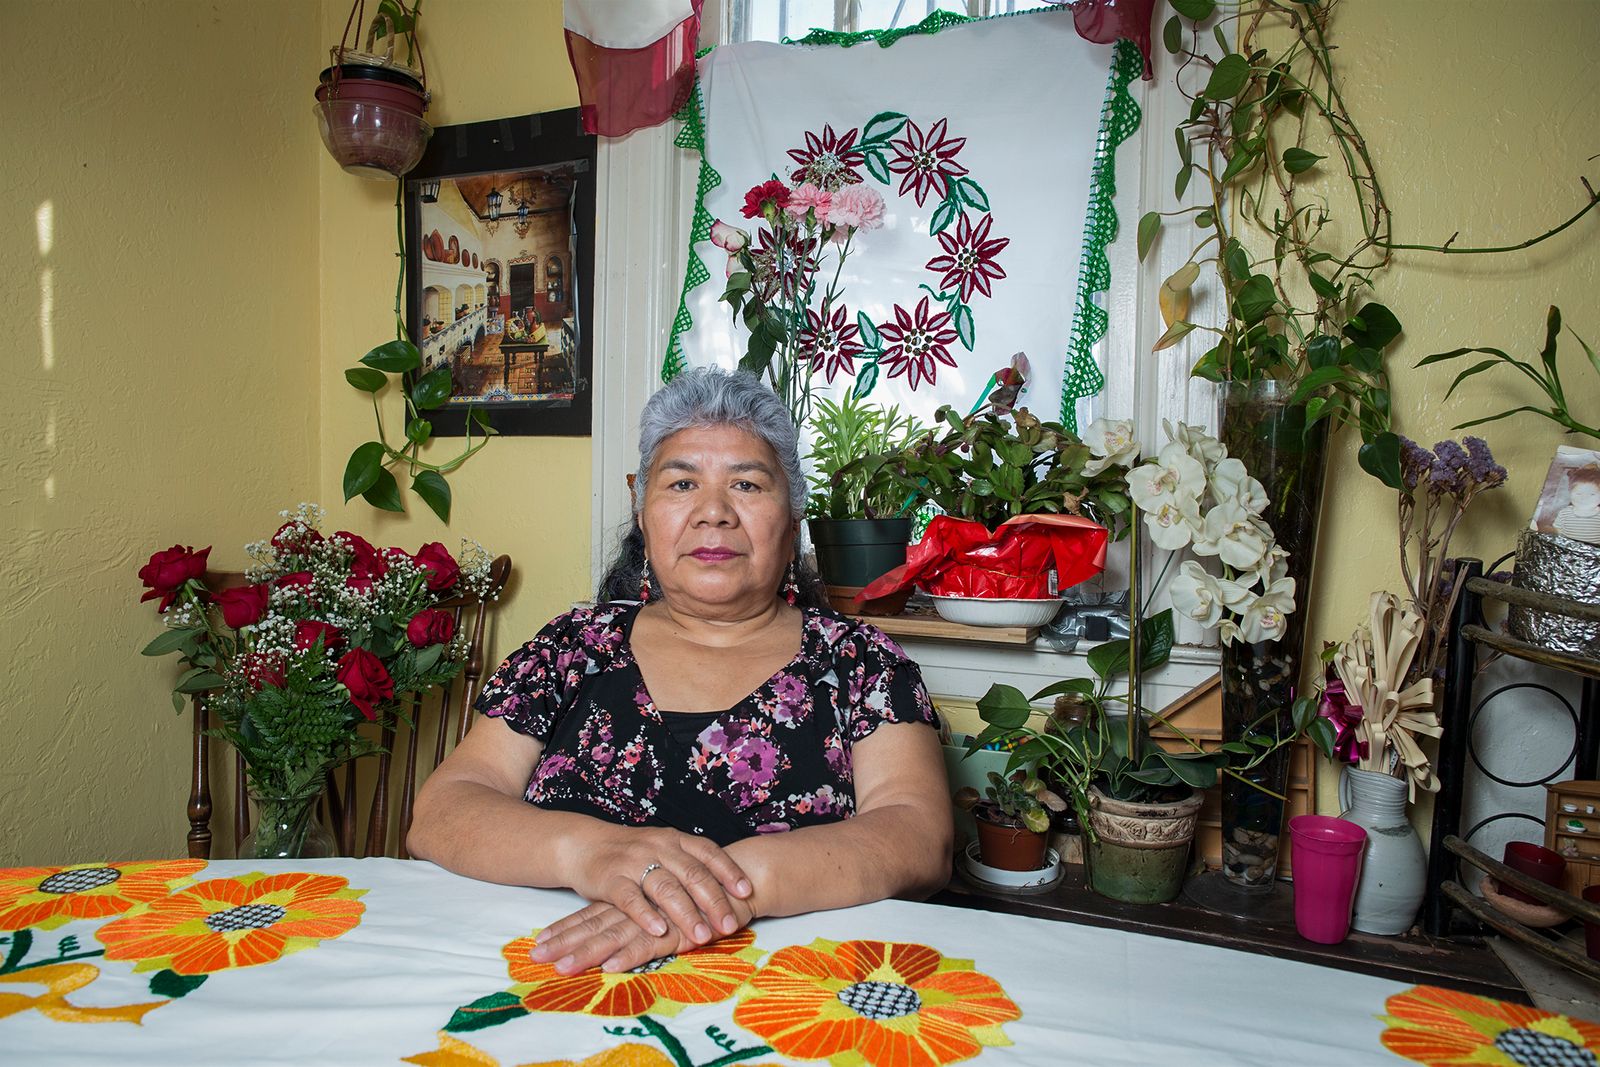 © Cinthya Santos Briones - Image from the Abuelas: Portraits of The Invisible Grandmothers photography project